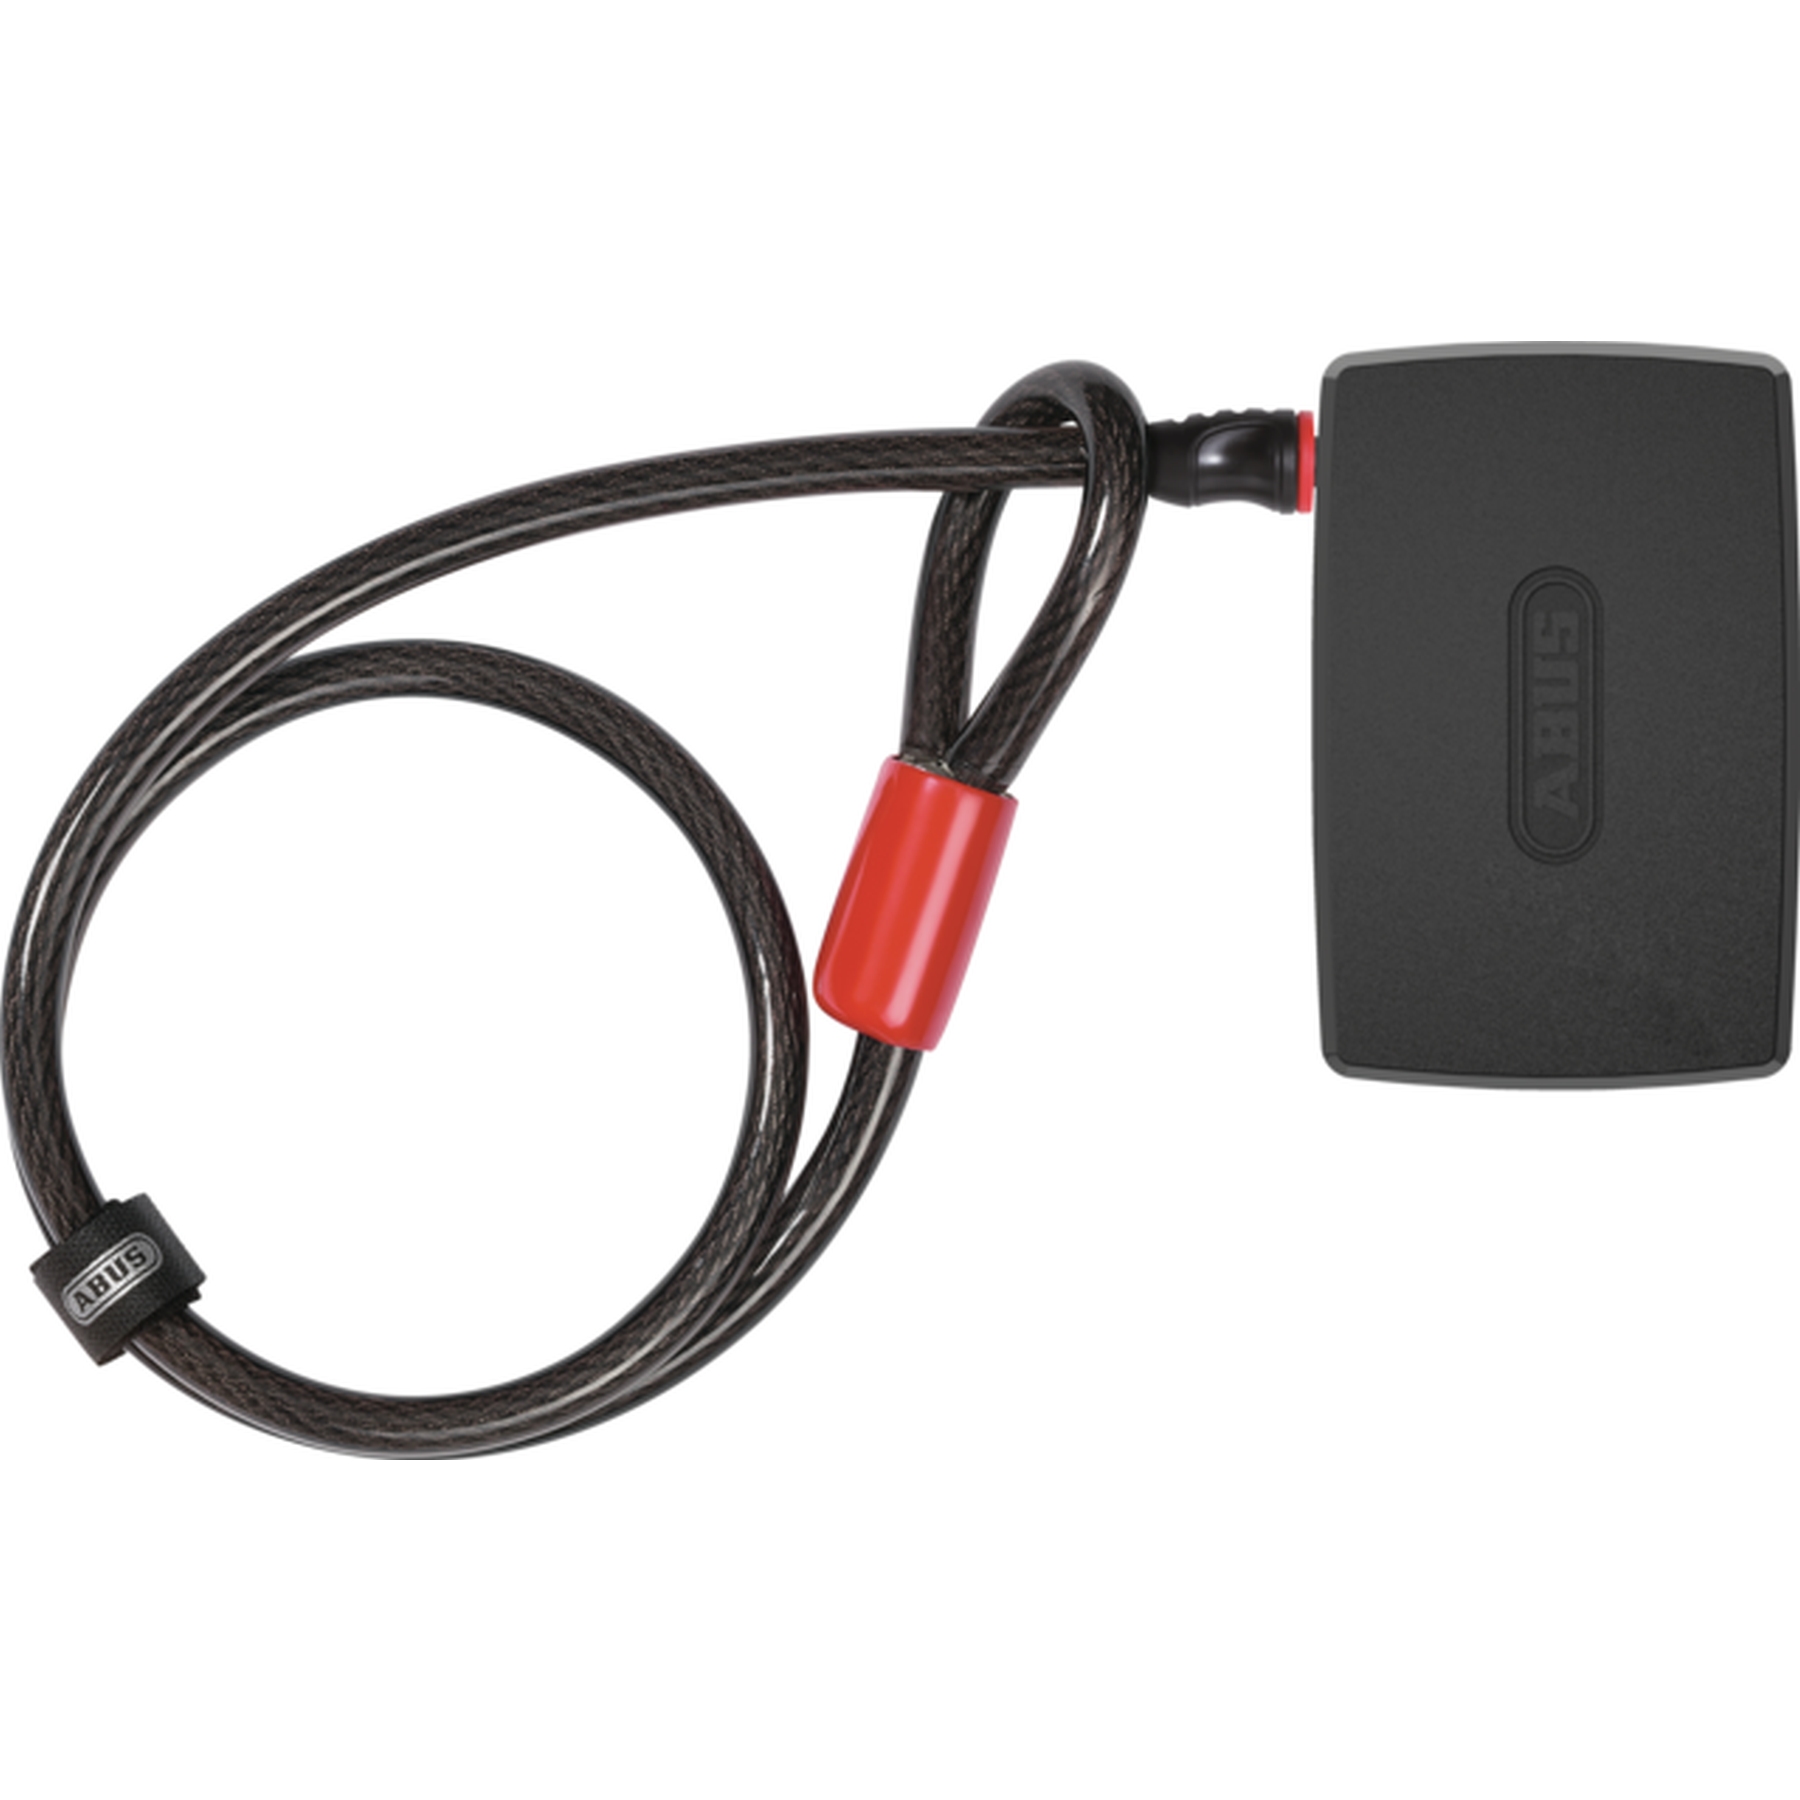 Picture of ABUS Alarmbox 2.0 BK + ACL 12/100 Cable Lock